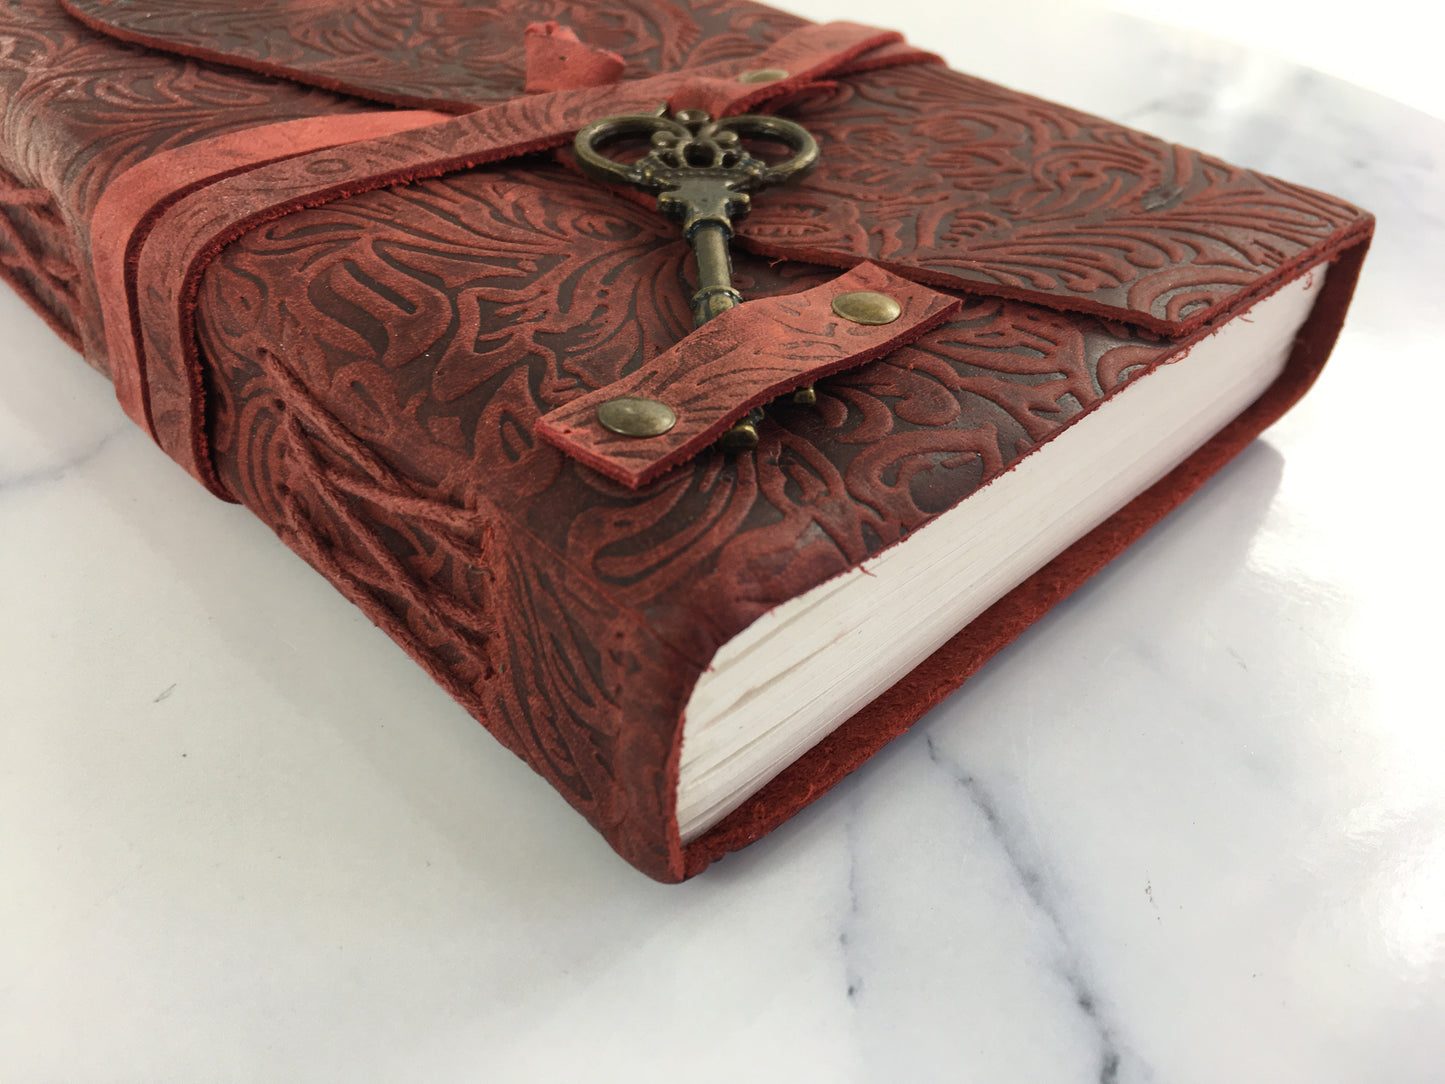 Quality Handmade Leather Journal- THICK 100% Cotton paper- TBBLJ2